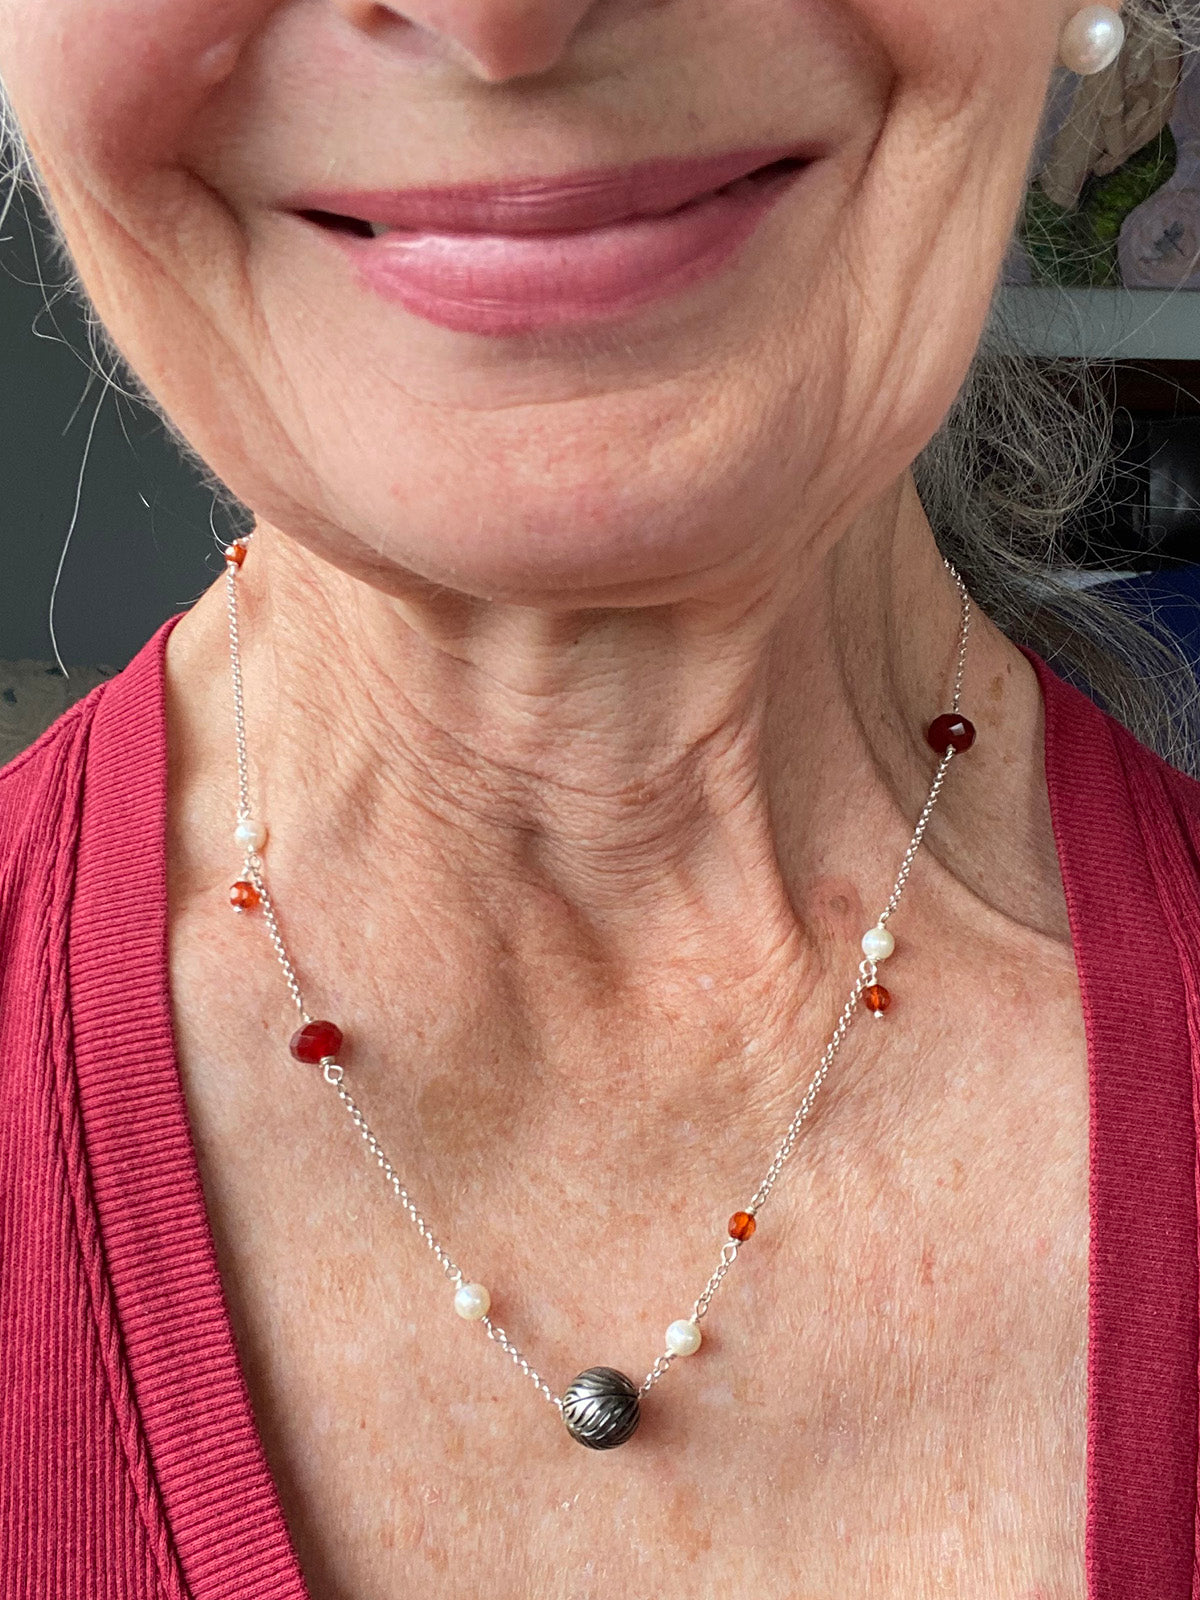 11mm Floating Carved Tahitian Pearl with White Pearls and Garnets by Linda Queally